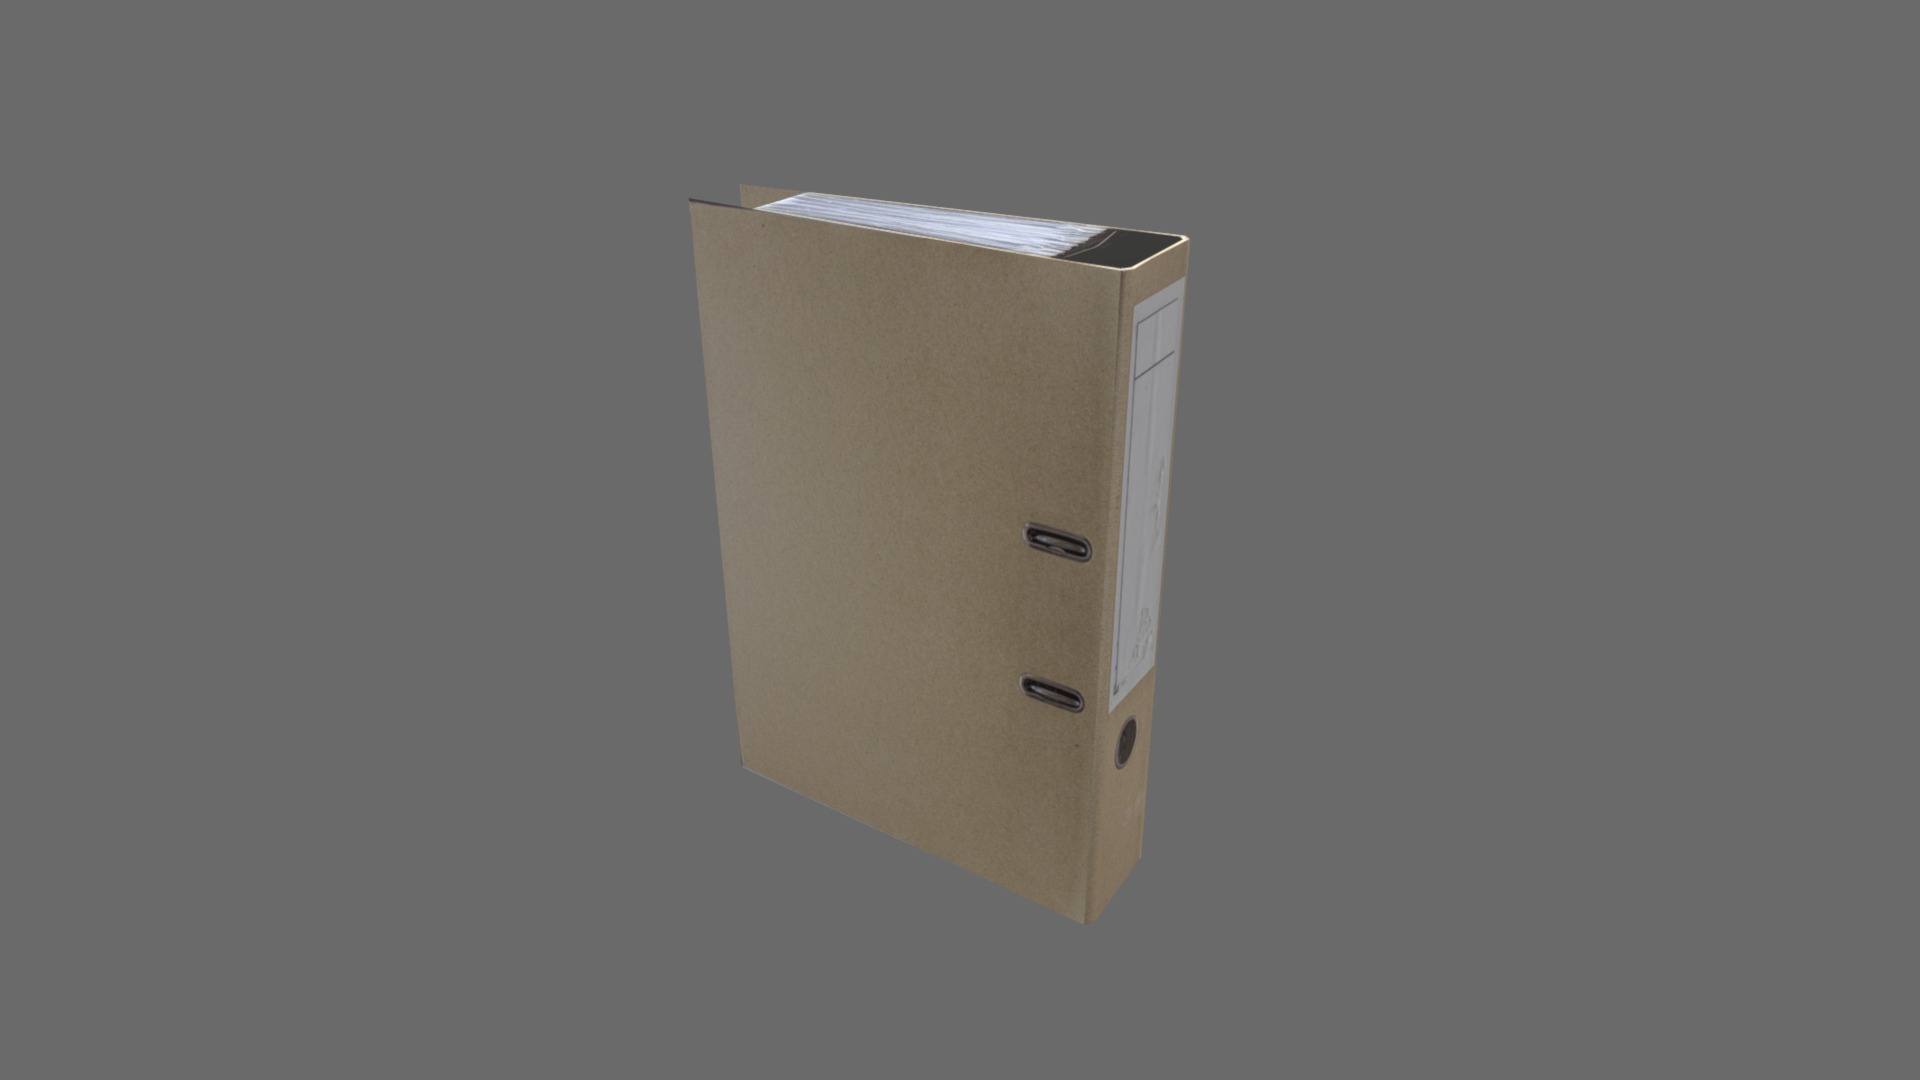 3D model File 02 - This is a 3D model of the File 02. The 3D model is about a box on a table.